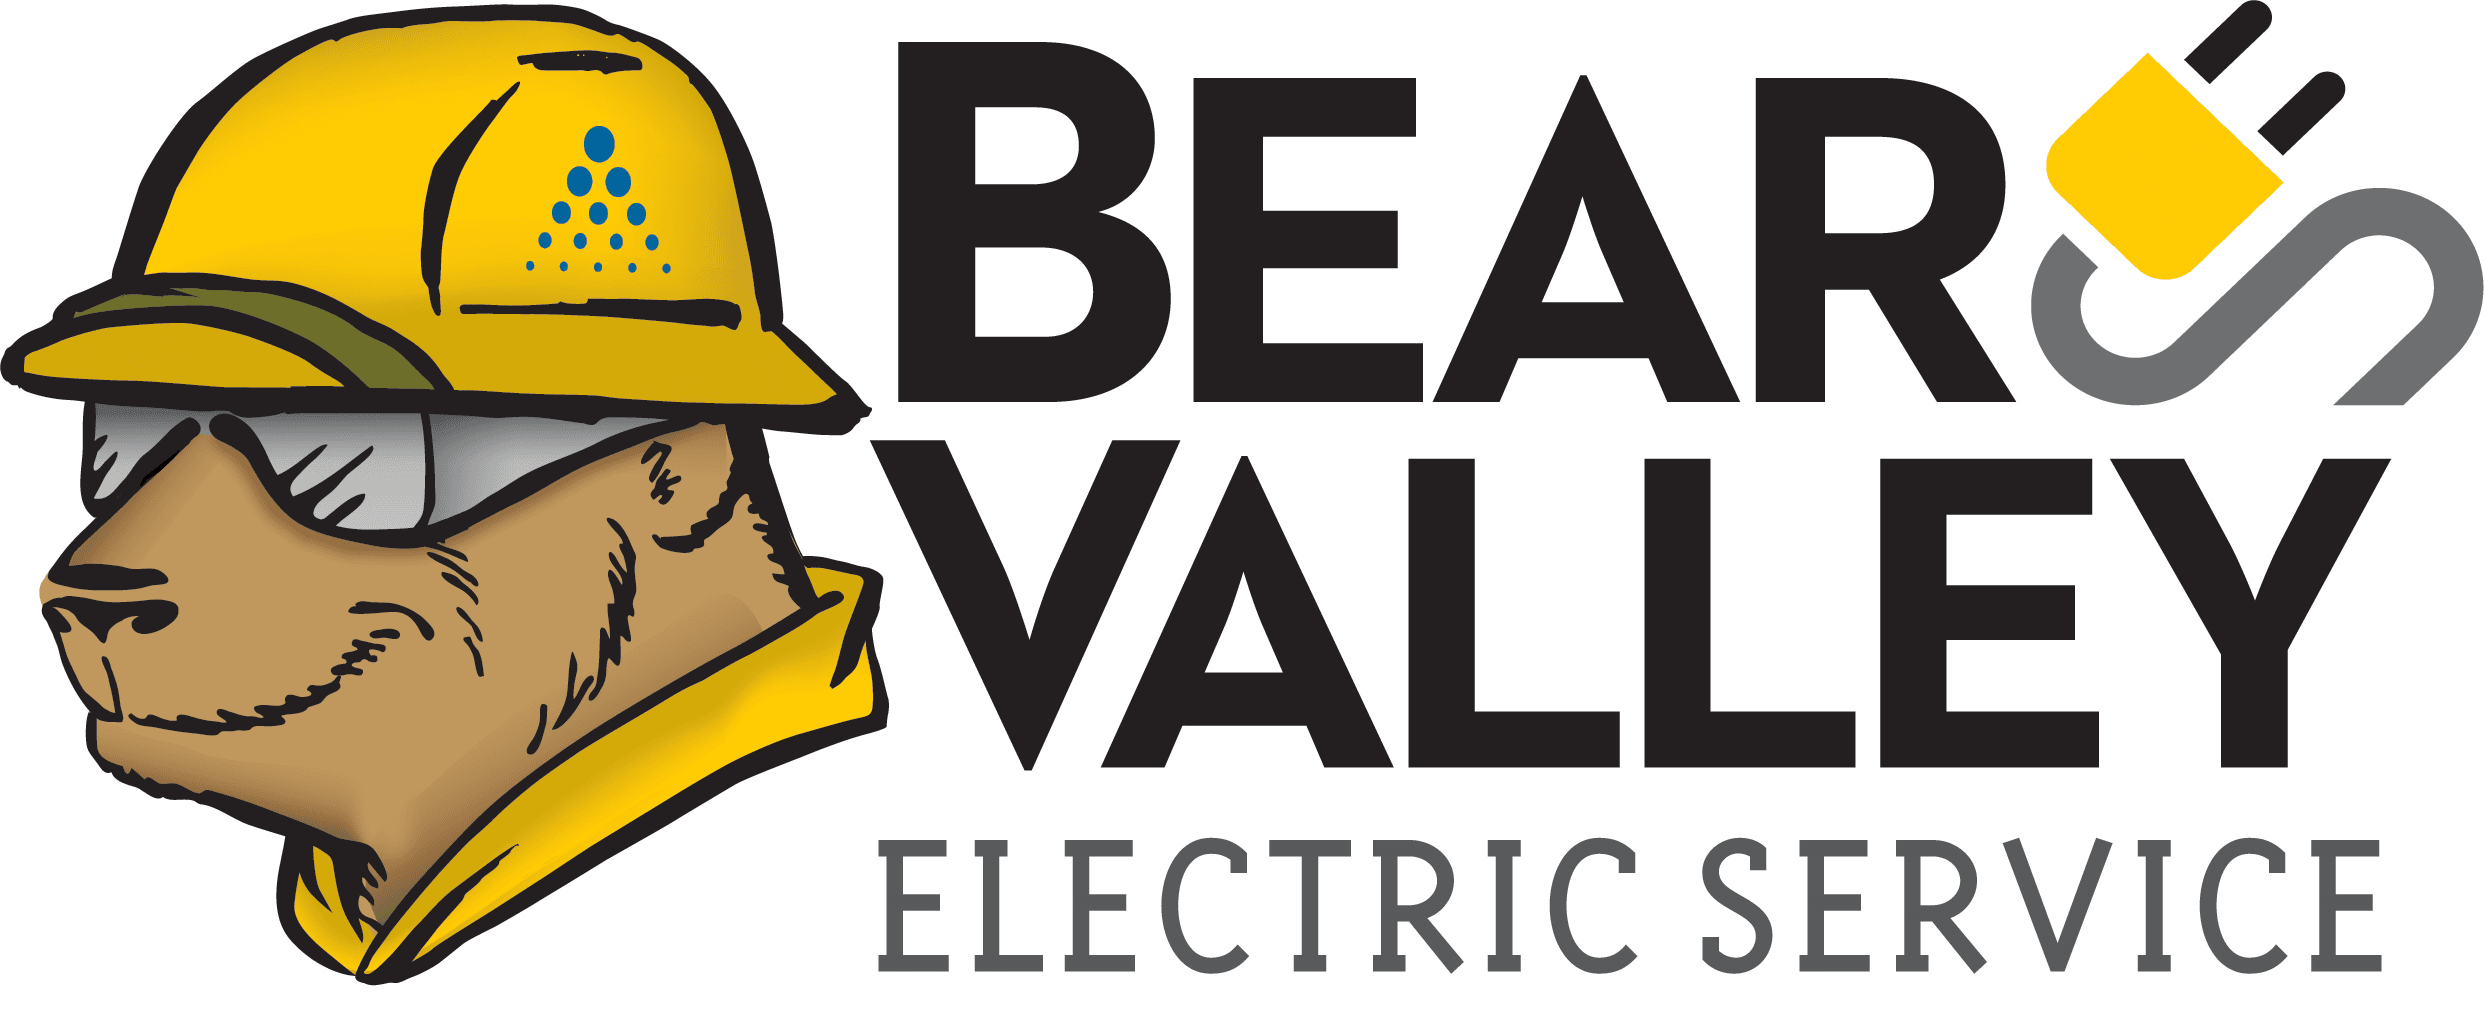 Bear Valley Electric Service, Inc